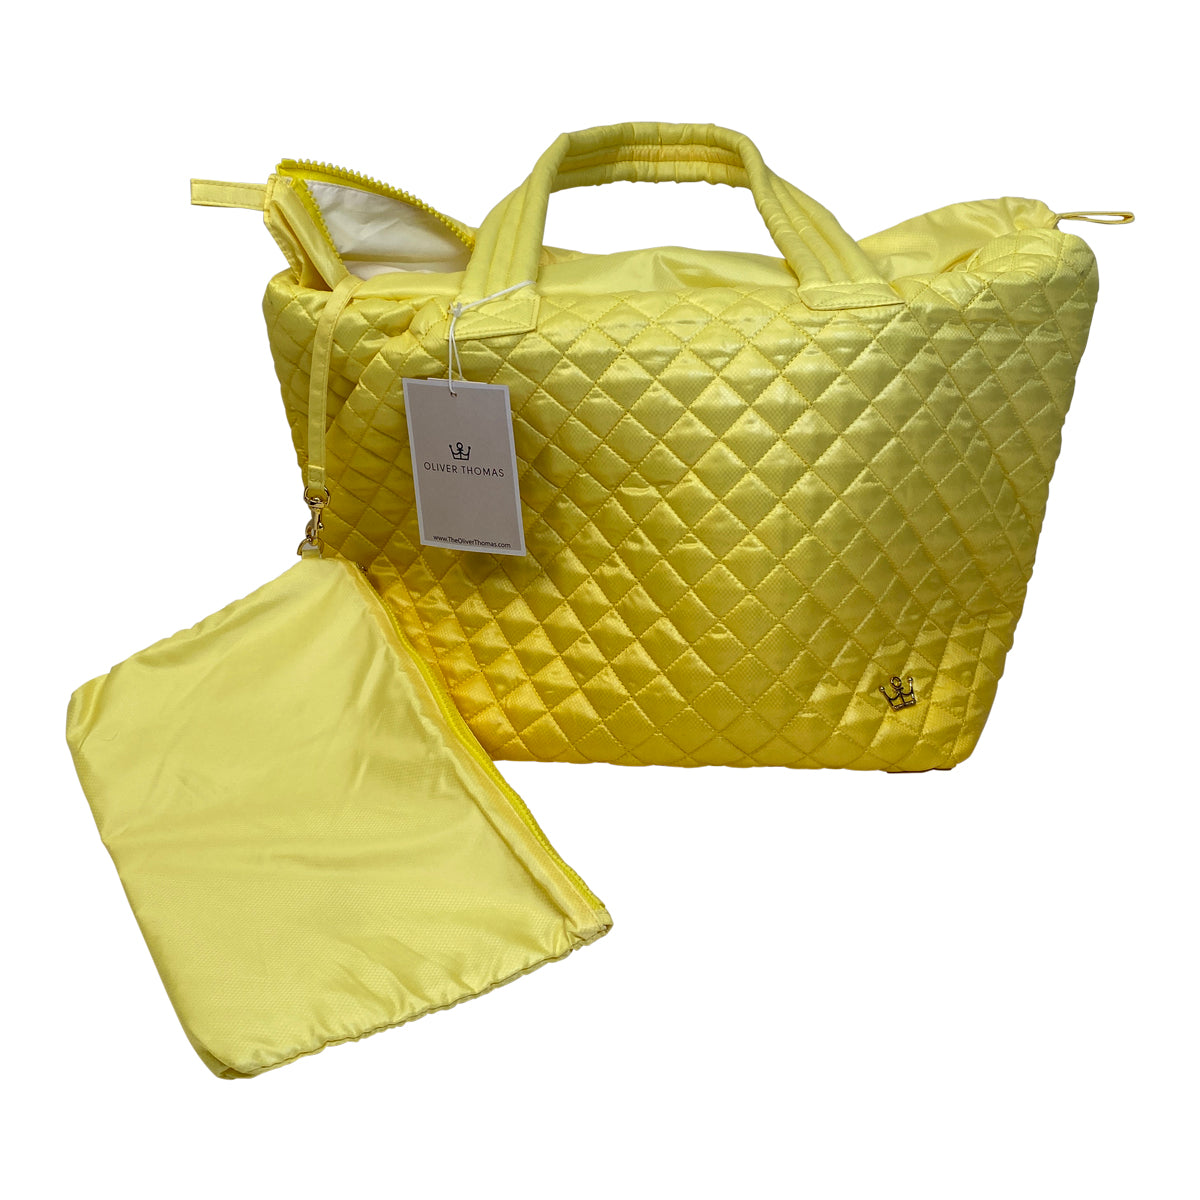 Oliver Thomas 'Wingwoman' Tote in Sunny Ombre